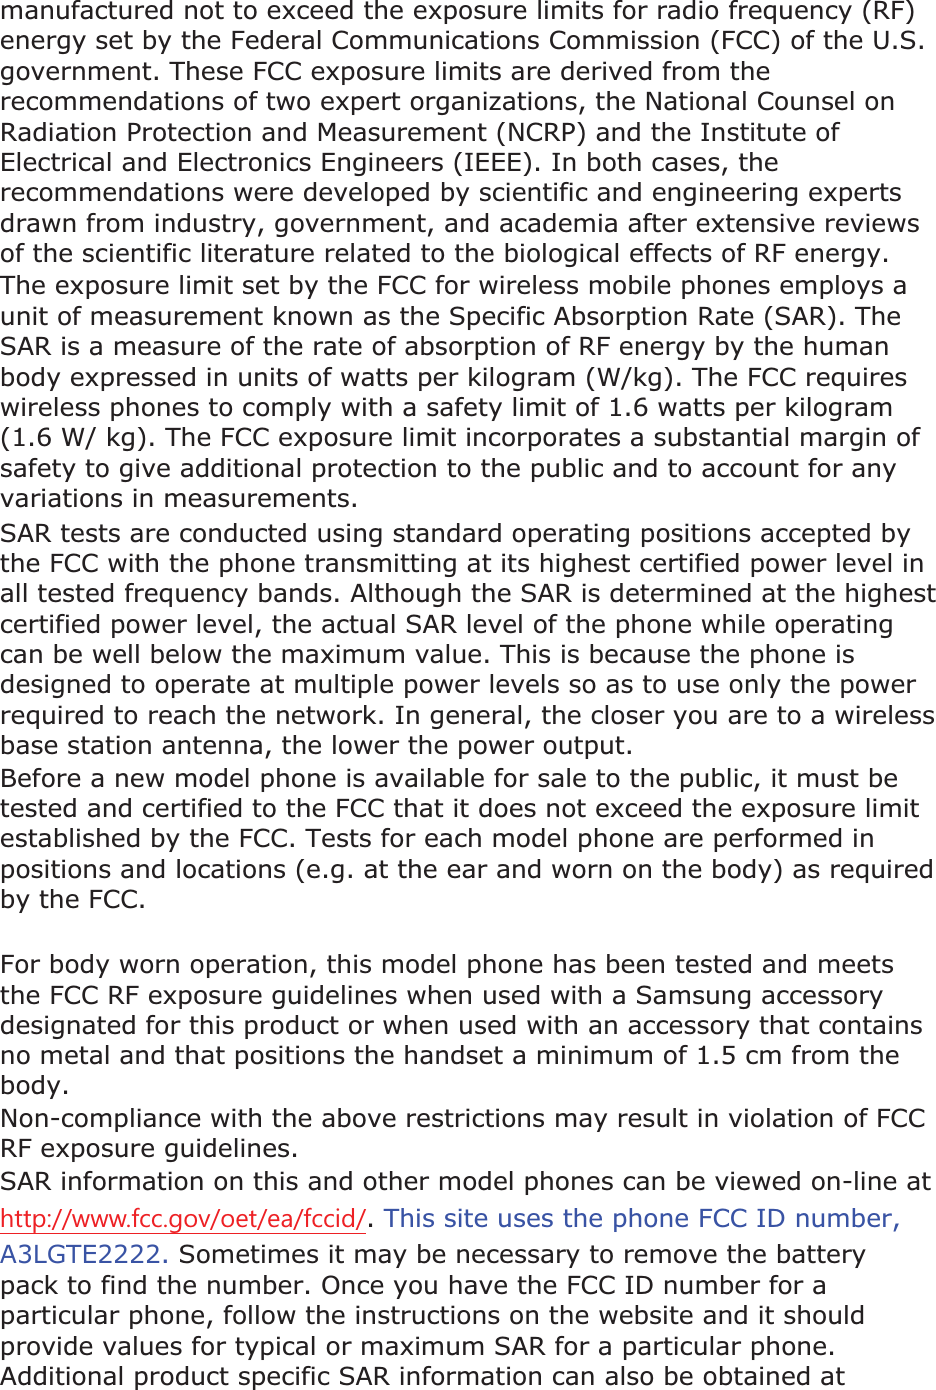 manufactured not to exceed the exposure limits for radio frequency (RF) energy set by the Federal Communications Commission (FCC) of the U.S. government. These FCC exposure limits are derived from the recommendations of two expert organizations, the National Counsel on Radiation Protection and Measurement (NCRP) and the Institute of Electrical and Electronics Engineers (IEEE). In both cases, the recommendations were developed by scientific and engineering experts drawn from industry, government, and academia after extensive reviews of the scientific literature related to the biological effects of RF energy.The exposure limit set by the FCC for wireless mobile phones employs a unit of measurement known as the Specific Absorption Rate (SAR). The SAR is a measure of the rate of absorption of RF energy by the human body expressed in units of watts per kilogram (W/kg). The FCC requires wireless phones to comply with a safety limit of 1.6 watts per kilogram (1.6 W/ kg). The FCC exposure limit incorporates a substantial margin of safety to give additional protection to the public and to account for any variations in measurements.SAR tests are conducted using standard operating positions accepted by the FCC with the phone transmitting at its highest certified power level in all tested frequency bands. Although the SAR is determined at the highest certified power level, the actual SAR level of the phone while operating can be well below the maximum value. This is because the phone is designed to operate at multiple power levels so as to use only the power required to reach the network. In general, the closer you are to a wireless base station antenna, the lower the power output. Before a new model phone is available for sale to the public, it must be tested and certified to the FCC that it does not exceed the exposure limit established by the FCC. Tests for each model phone are performed in positions and locations (e.g. at the ear and worn on the body) as required by the FCC.     For body worn operation, this model phone has been tested and meets the FCC RF exposure guidelines when used with a Samsung accessory designated for this product or when used with an accessory that contains no metal and that positions the handset a minimum of 1.5 cm from the body.Non-compliance with the above restrictions may result in violation of FCC RF exposure guidelines. SAR information on this and other model phones can be viewed on-line at KWWSZZZIFFJRYRHWHDIFFLG.This site uses the phone FCC ID number, A3LGTE2222. Sometimes it may be necessary to remove the battery pack to find the number. Once you have the FCC ID number for a particular phone, follow the instructions on the website and it should provide values for typical or maximum SAR for a particular phone. Additional product specific SAR information can also be obtained at 